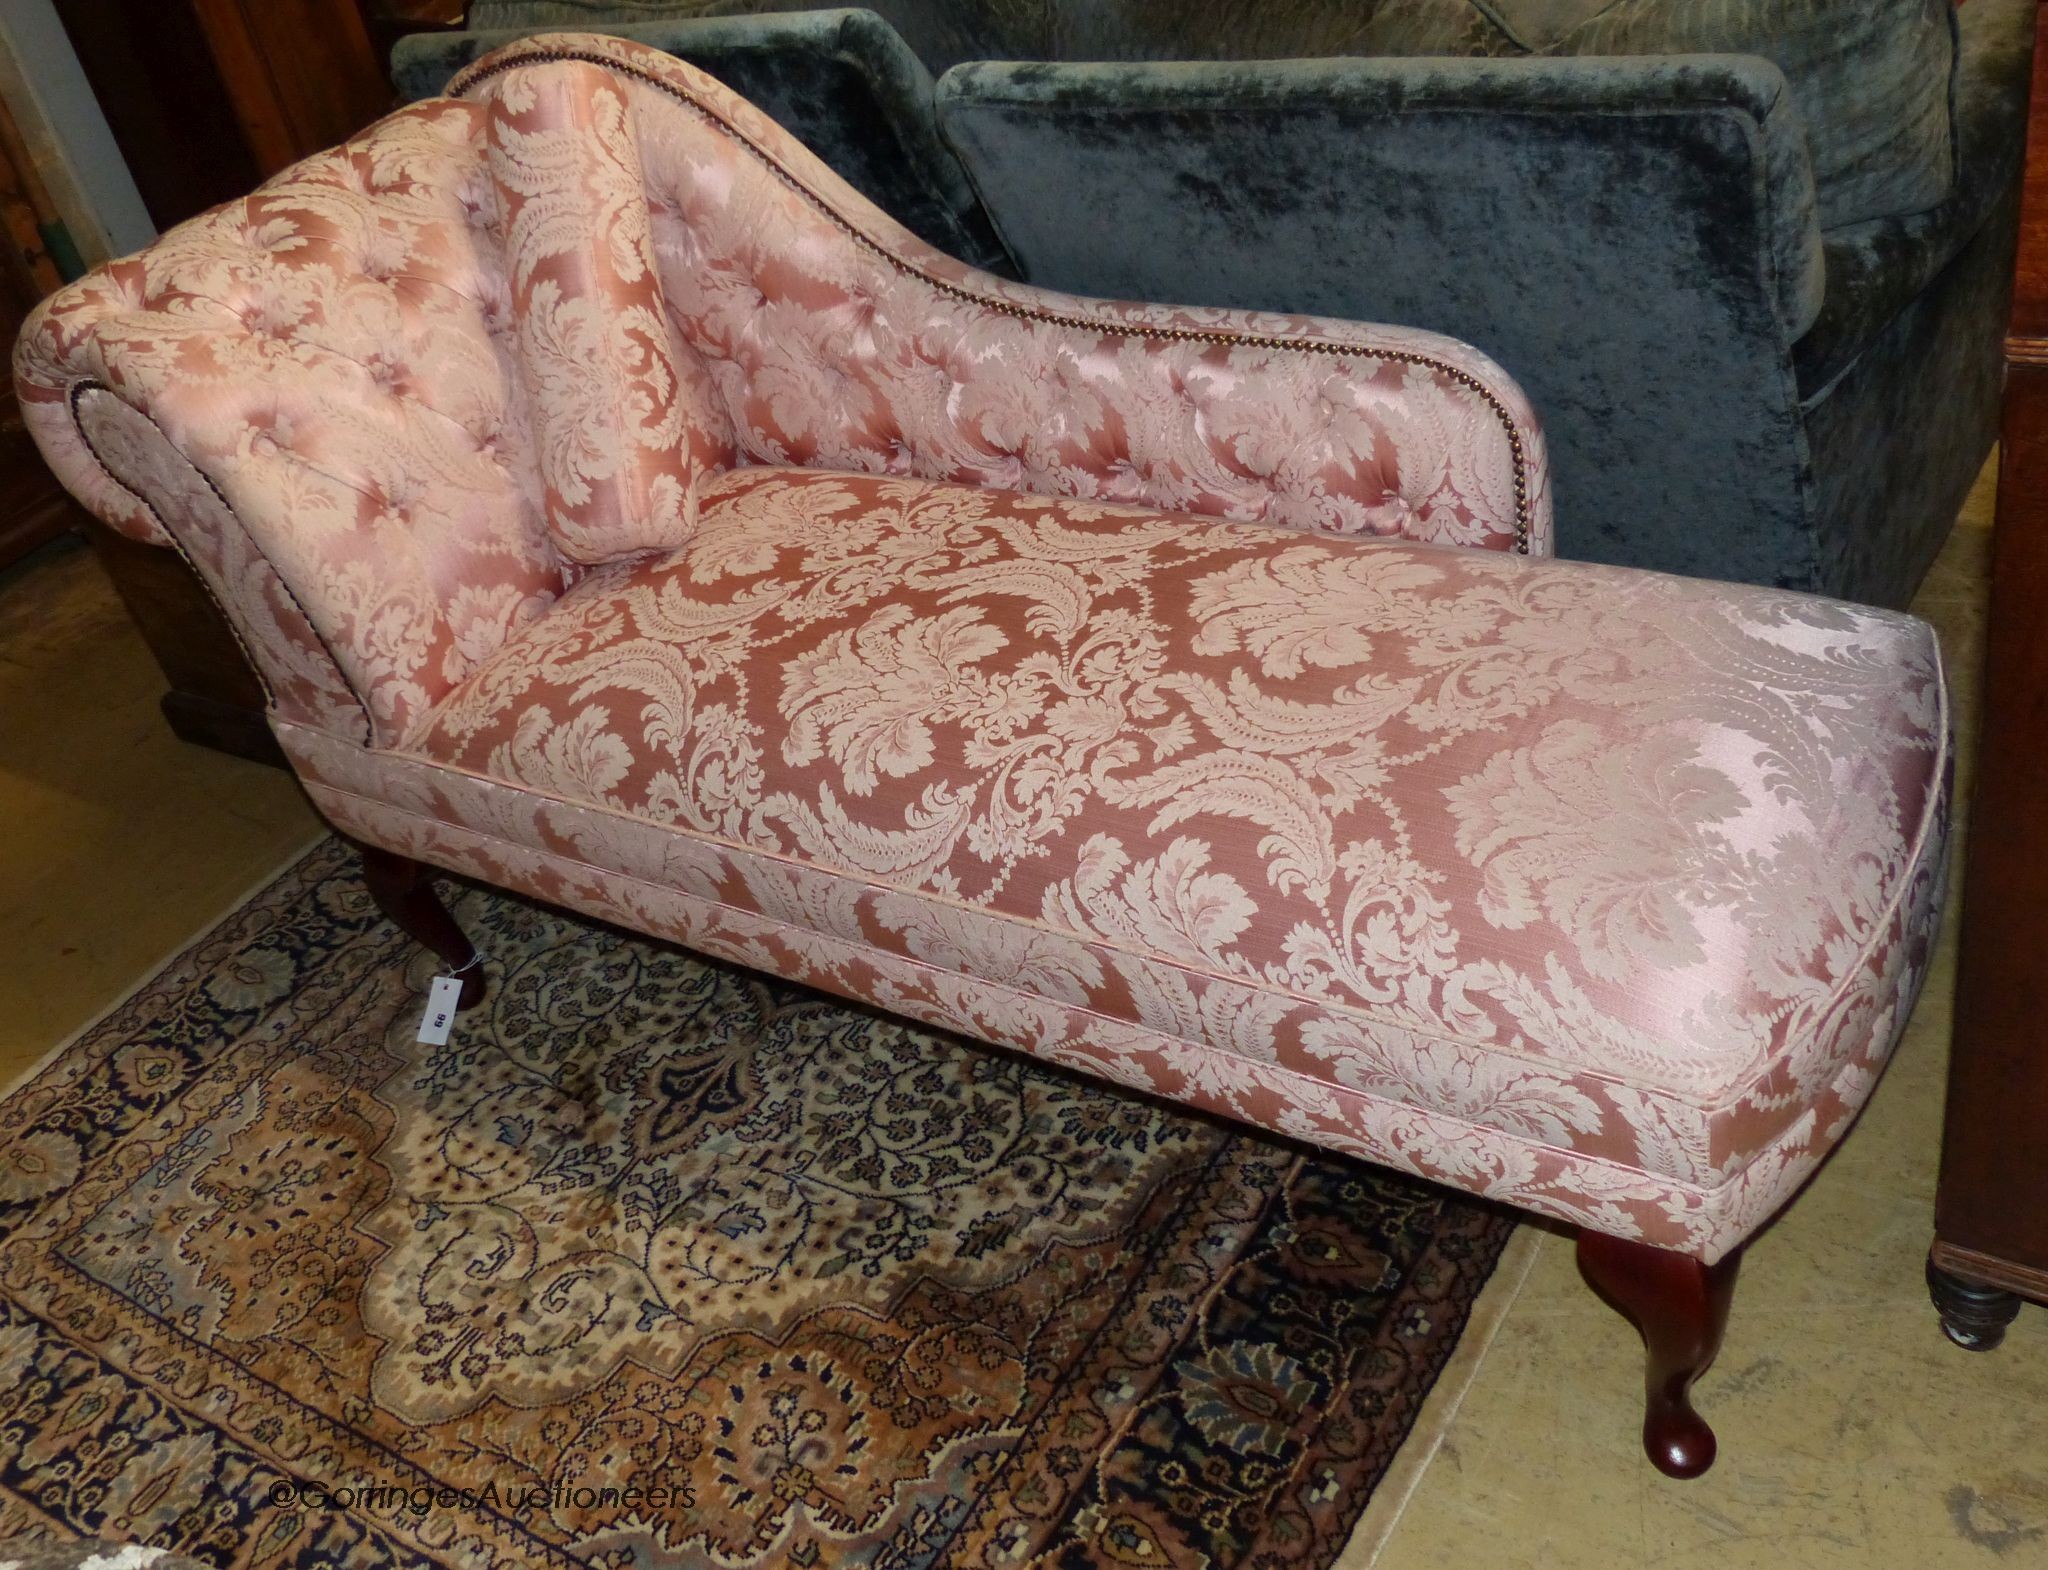 A Victorian style chaise longue upholstered in patterned pink damask, length 160cm, depth 58cm, height 80cm